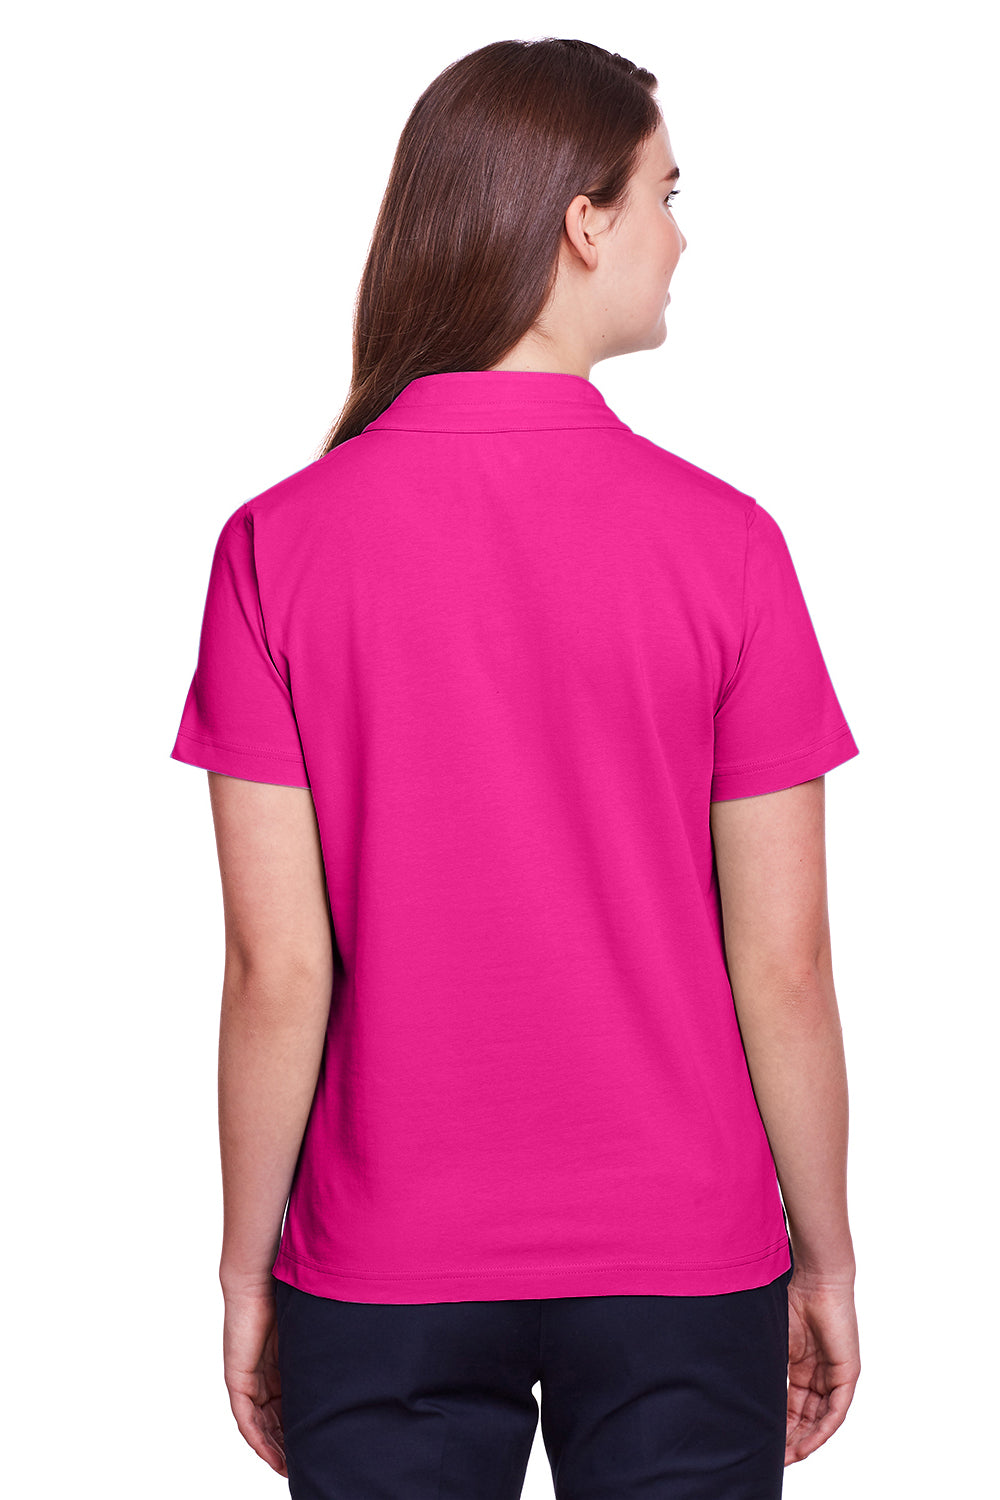 UltraClub UC105W Womens Lakeshore Performance Moisture Wicking Short Sleeve Polo Shirt Heliconia Pink Back